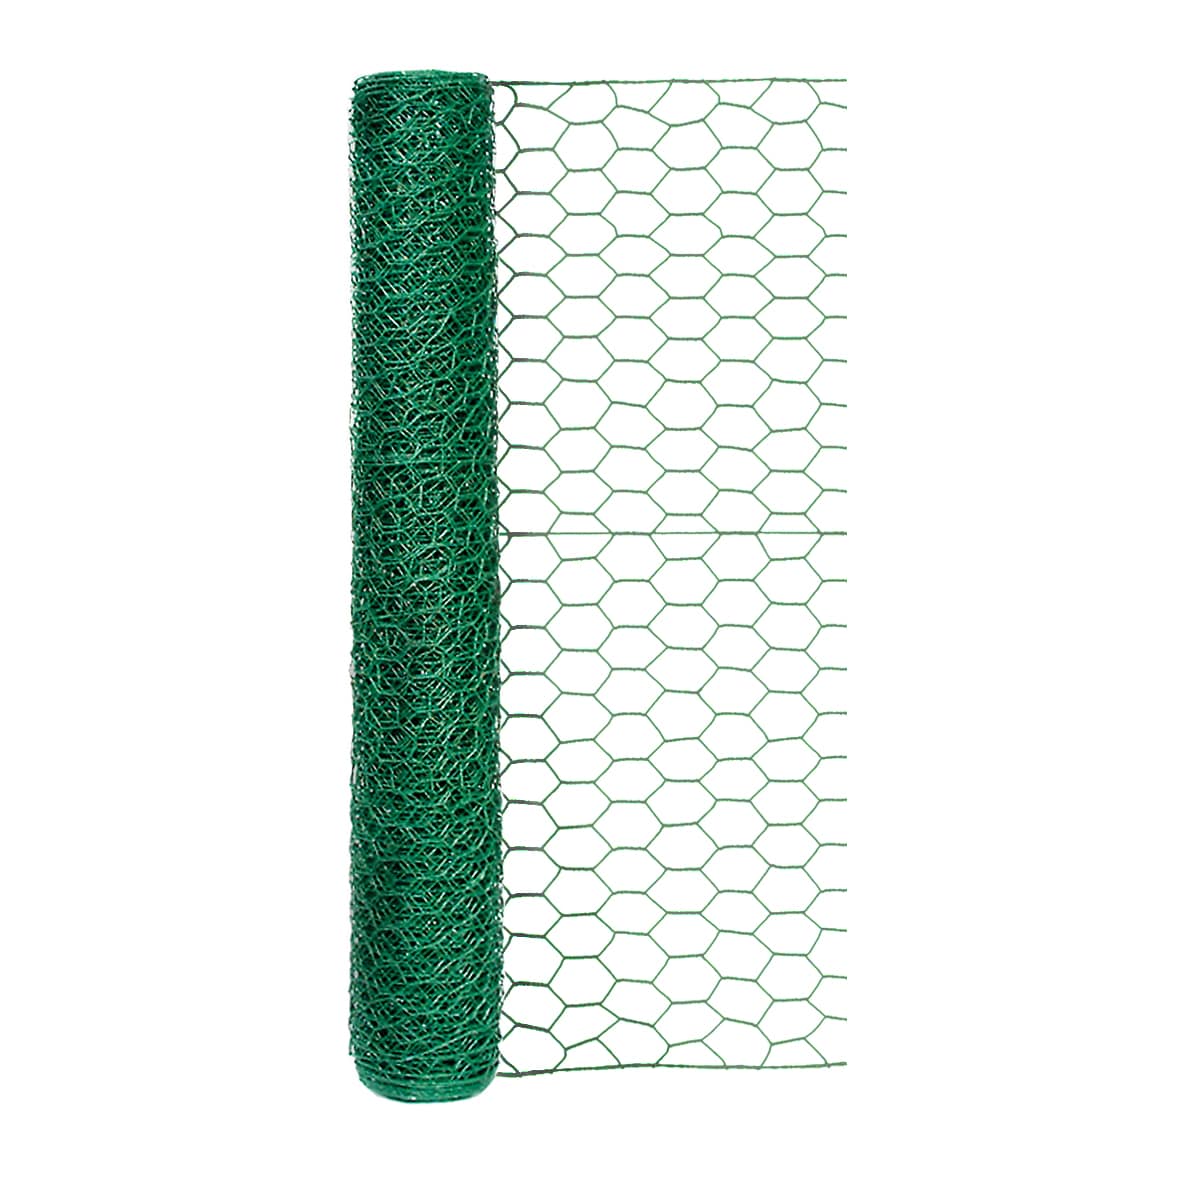 GARDEN CRAFT 25-ft x 2-ft Green PVC Coated Steel Chicken Wire Rolled  Fencing with Mesh Size 1-in in the Rolled Fencing department at